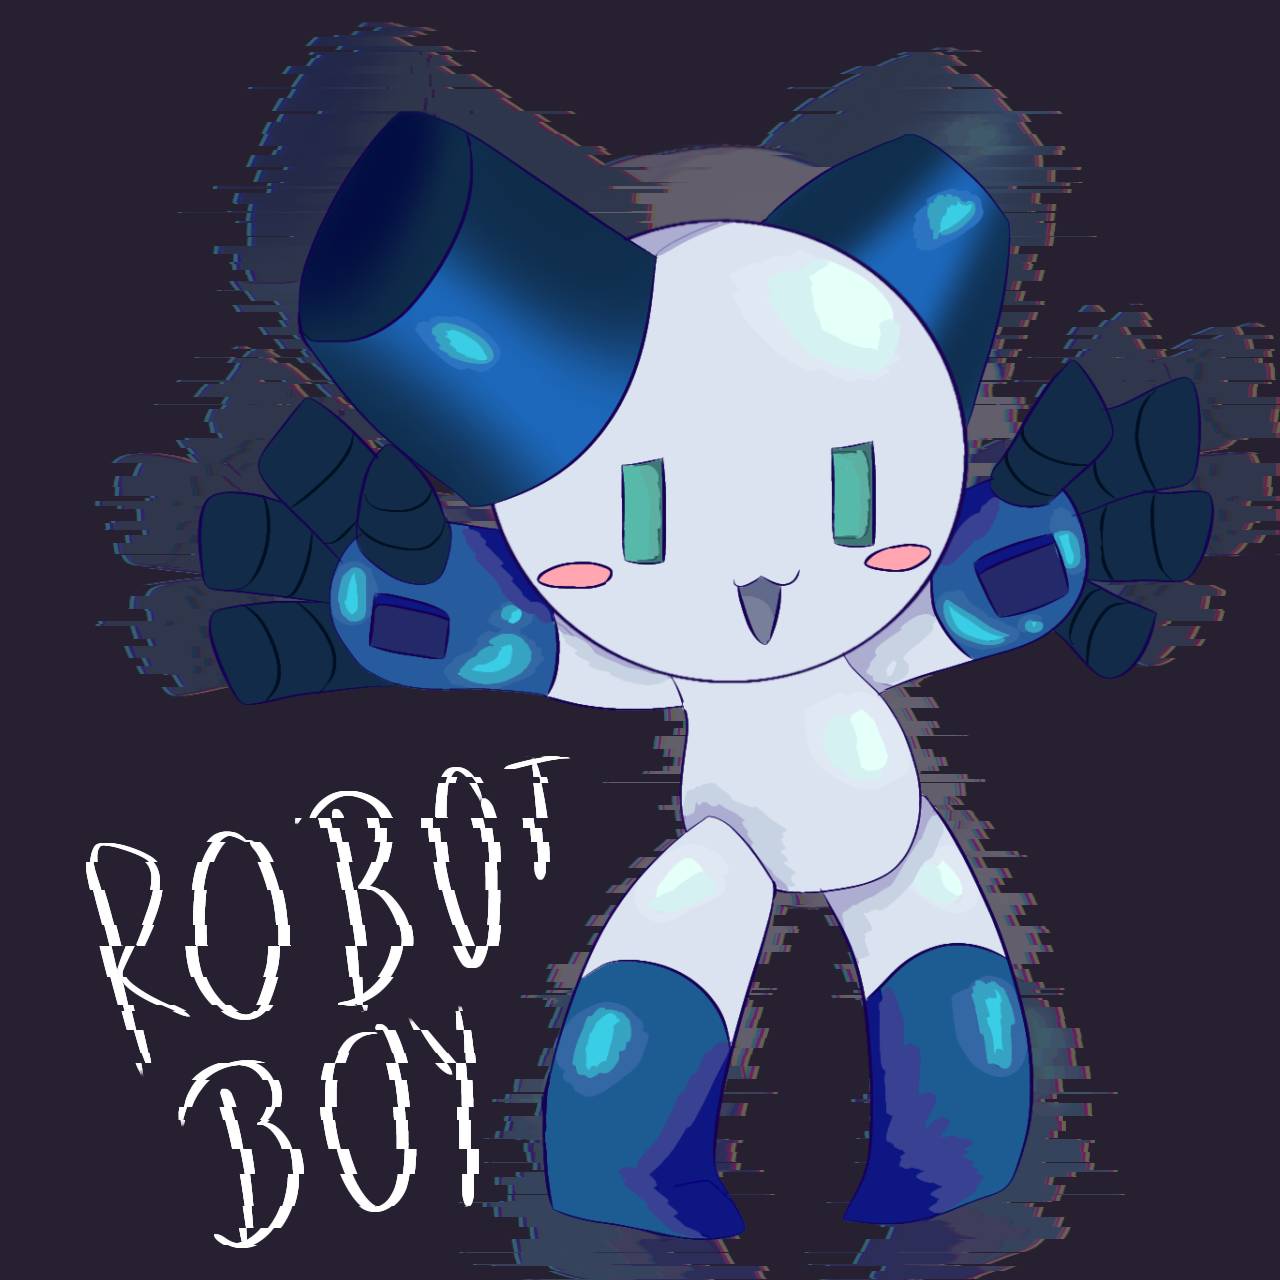 Pin by Cartoons and Anime Lover on ️️️️Robotboy️️️️ 💙 in